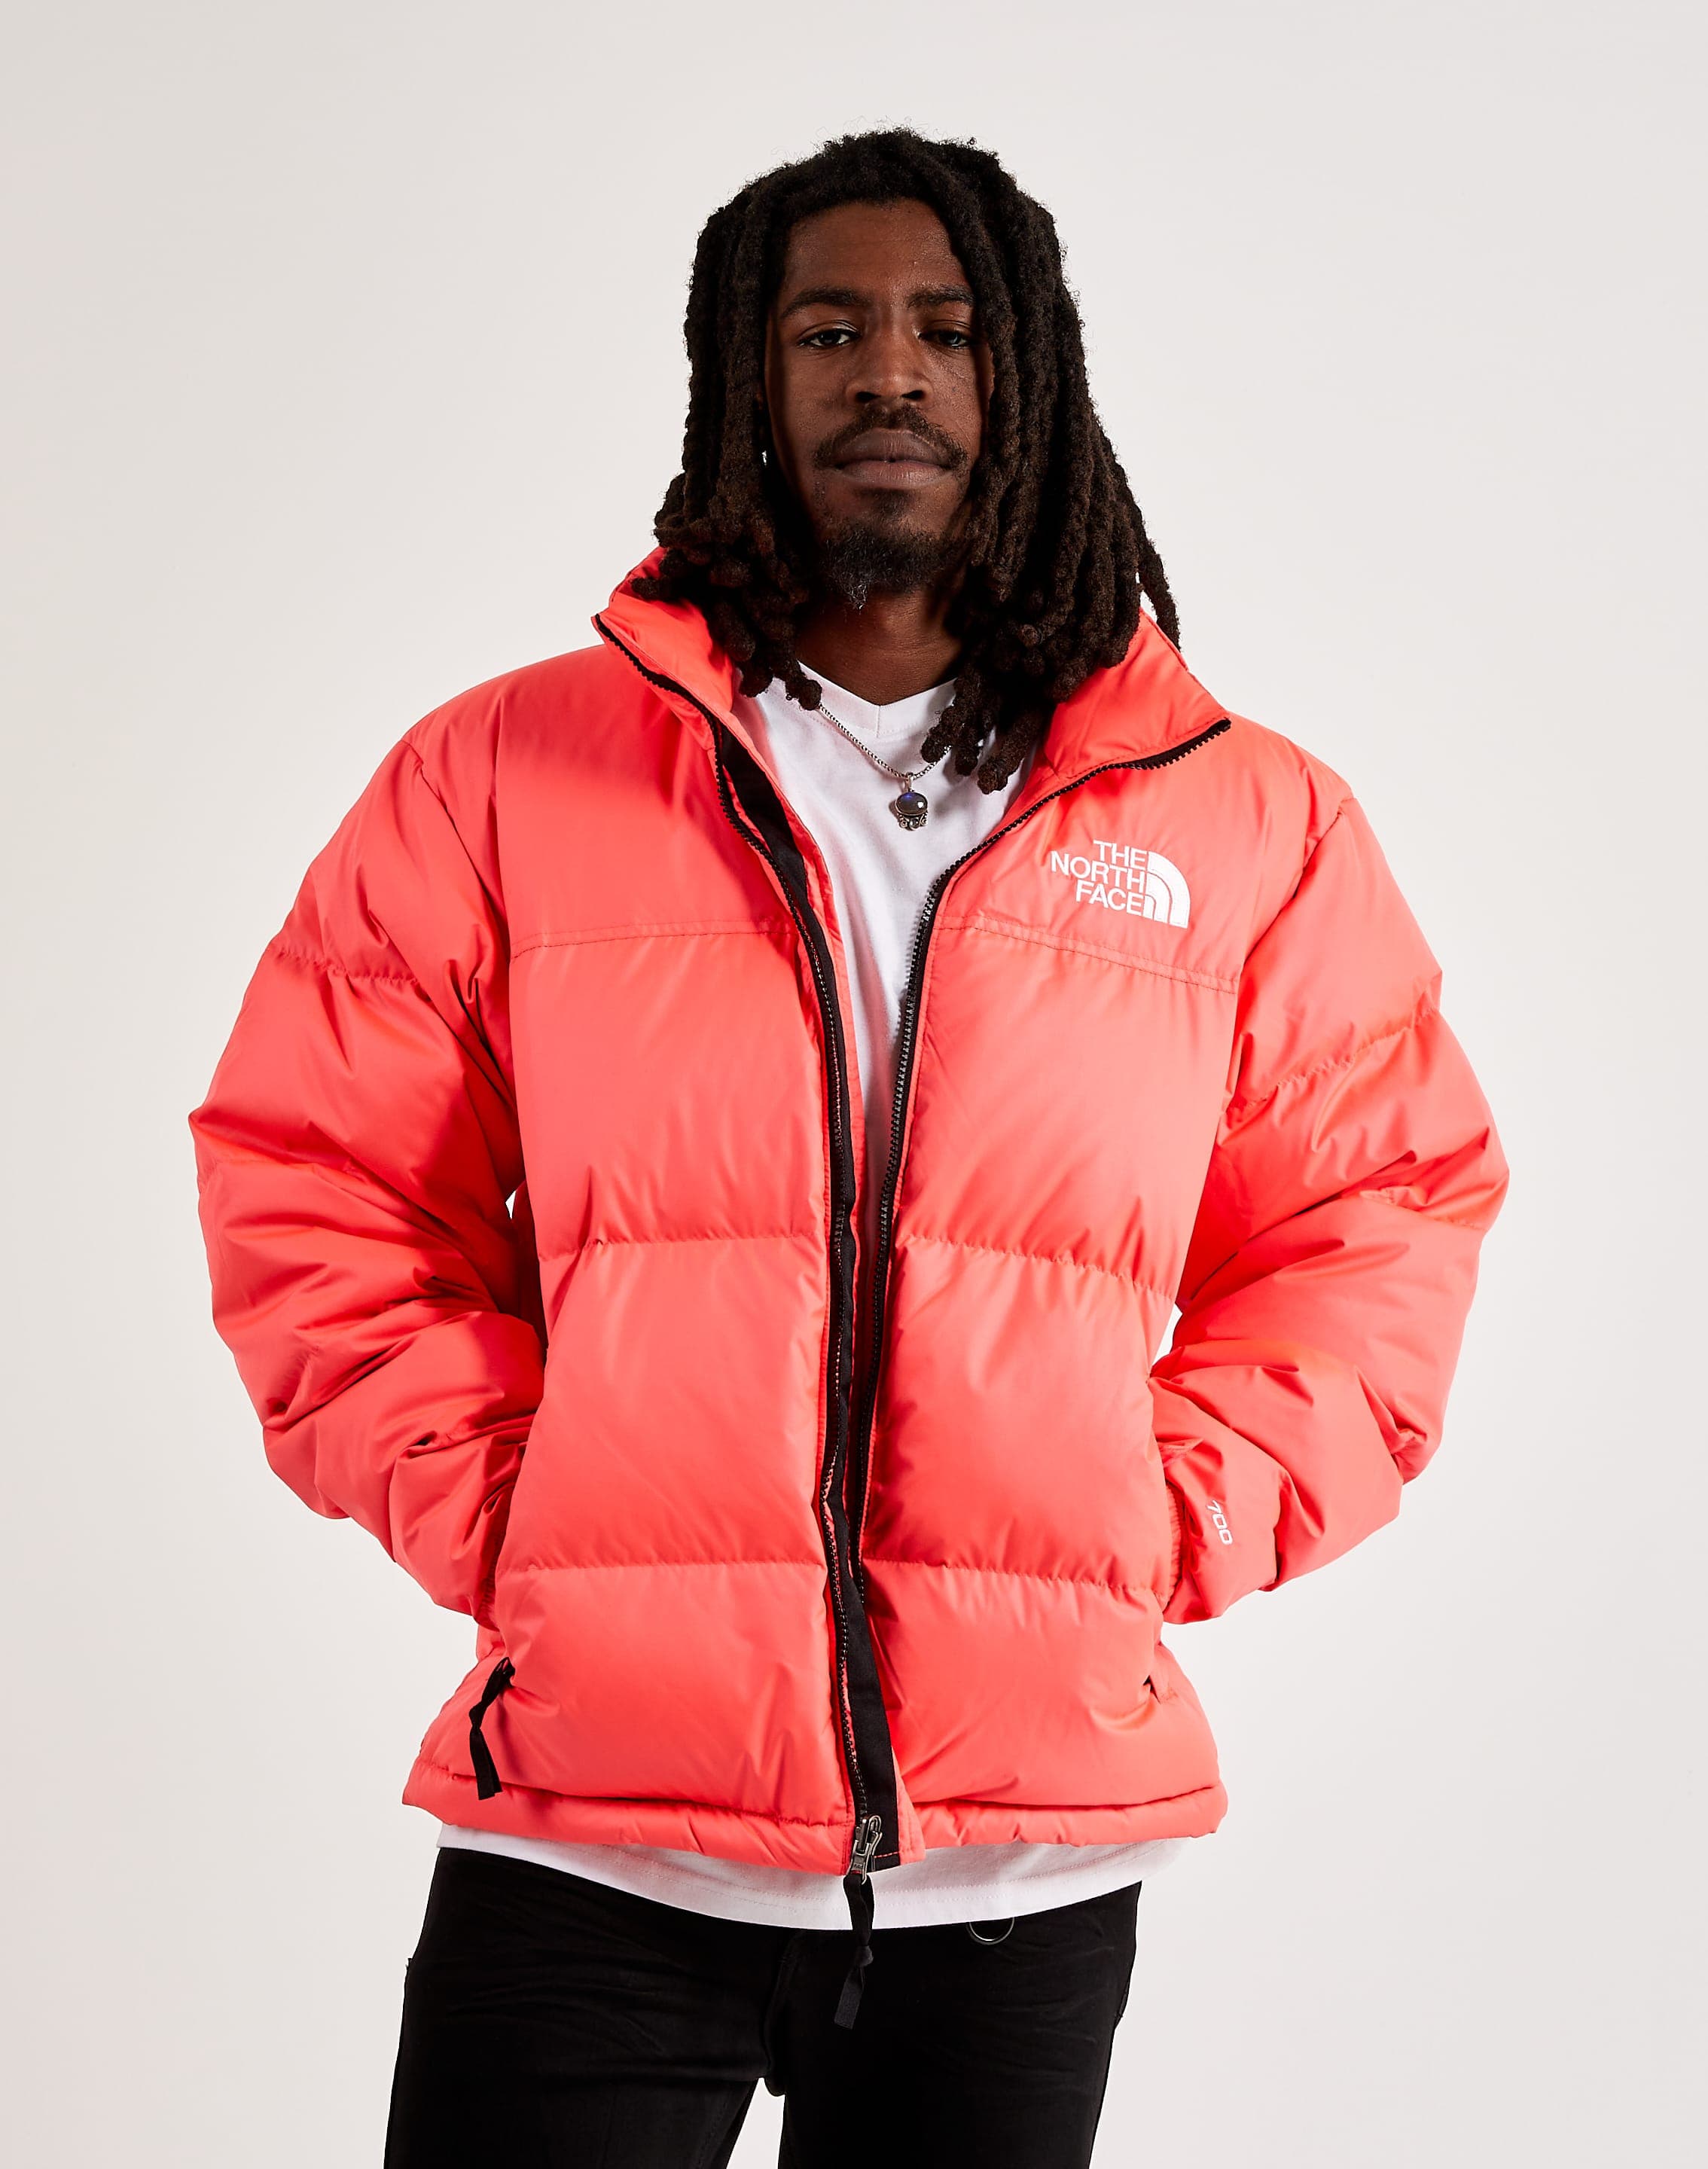 The North Face 1996 Retro Jacket – DTLR